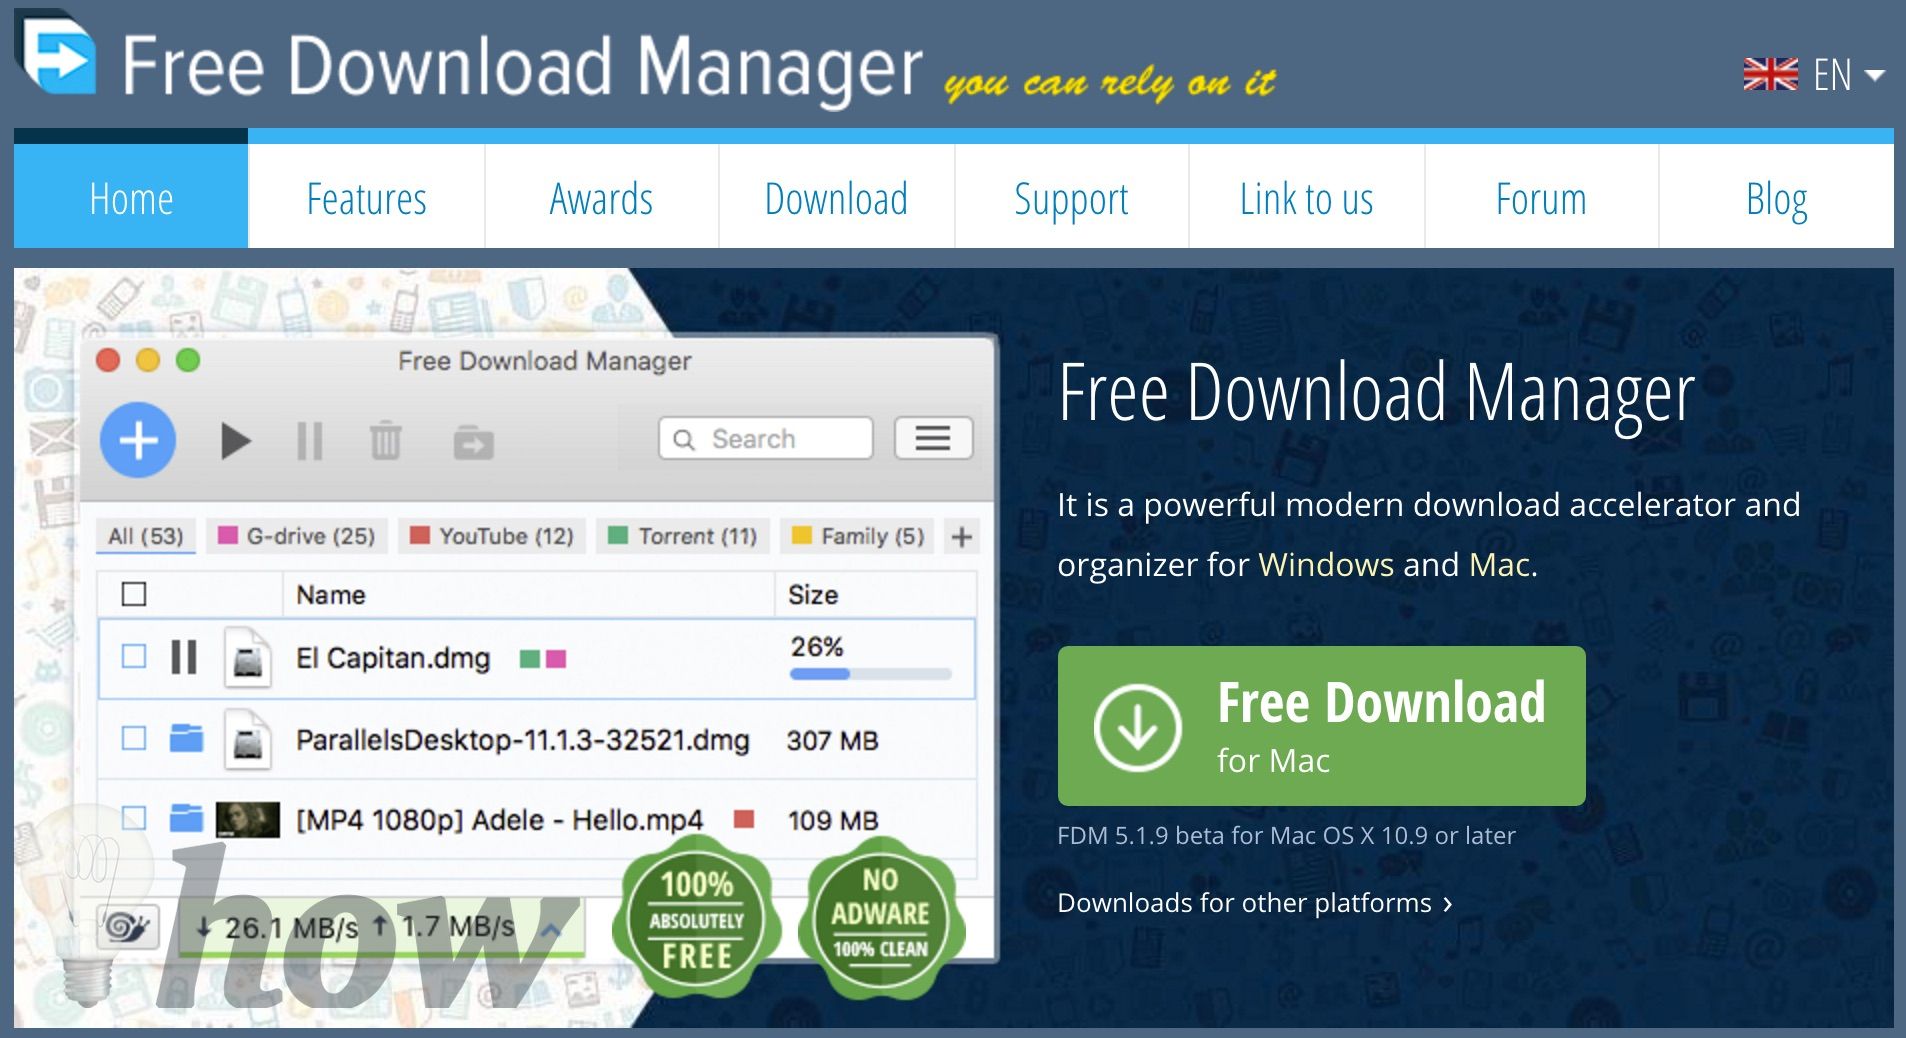 idm full version cracked free download